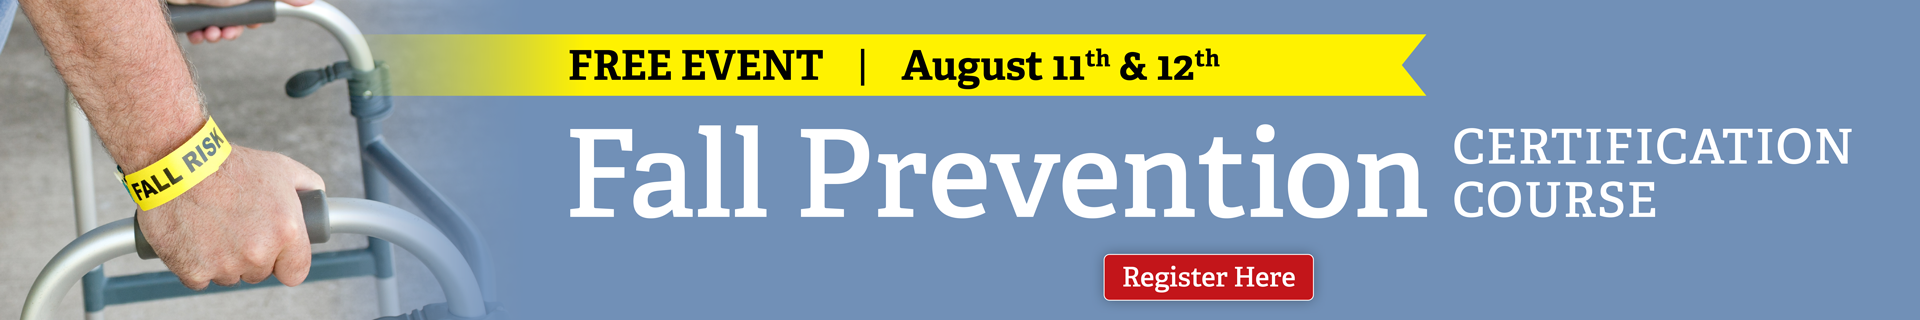 Fall Prevention Certification Course: Fall-Proof Your Patients with Today’s Best Practices